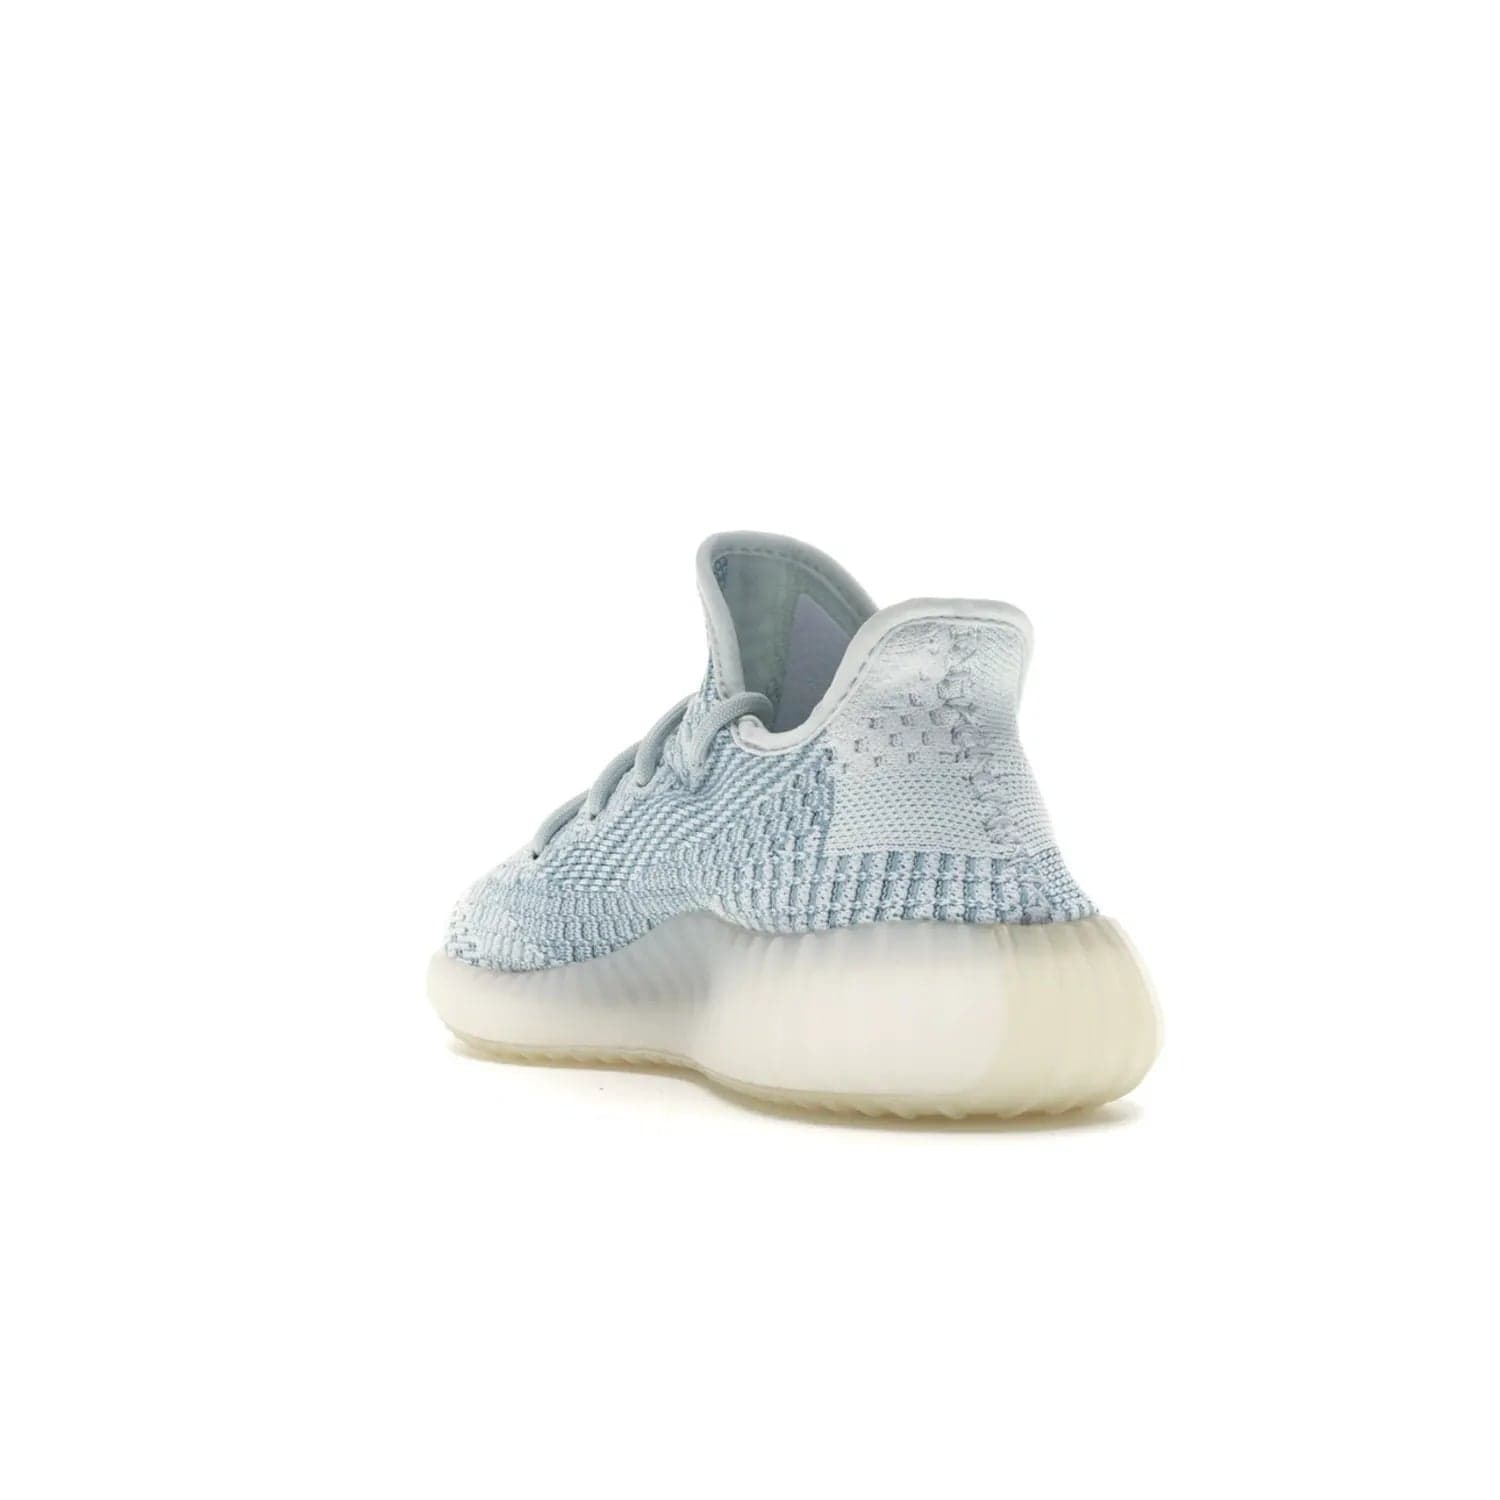 adidas Yeezy Boost 350 V2 Cloud White (Non-Reflective) - Image 25 - Only at www.BallersClubKickz.com - Uniquely designed adidas Yeezy Boost 350 V2 Cloud White (Non-Reflective) with a Primeknit upper in shades of cream and blue with a contrasting hard sole. A fashion-forward sneaker with a transparent strip and blue-and-white patterns.